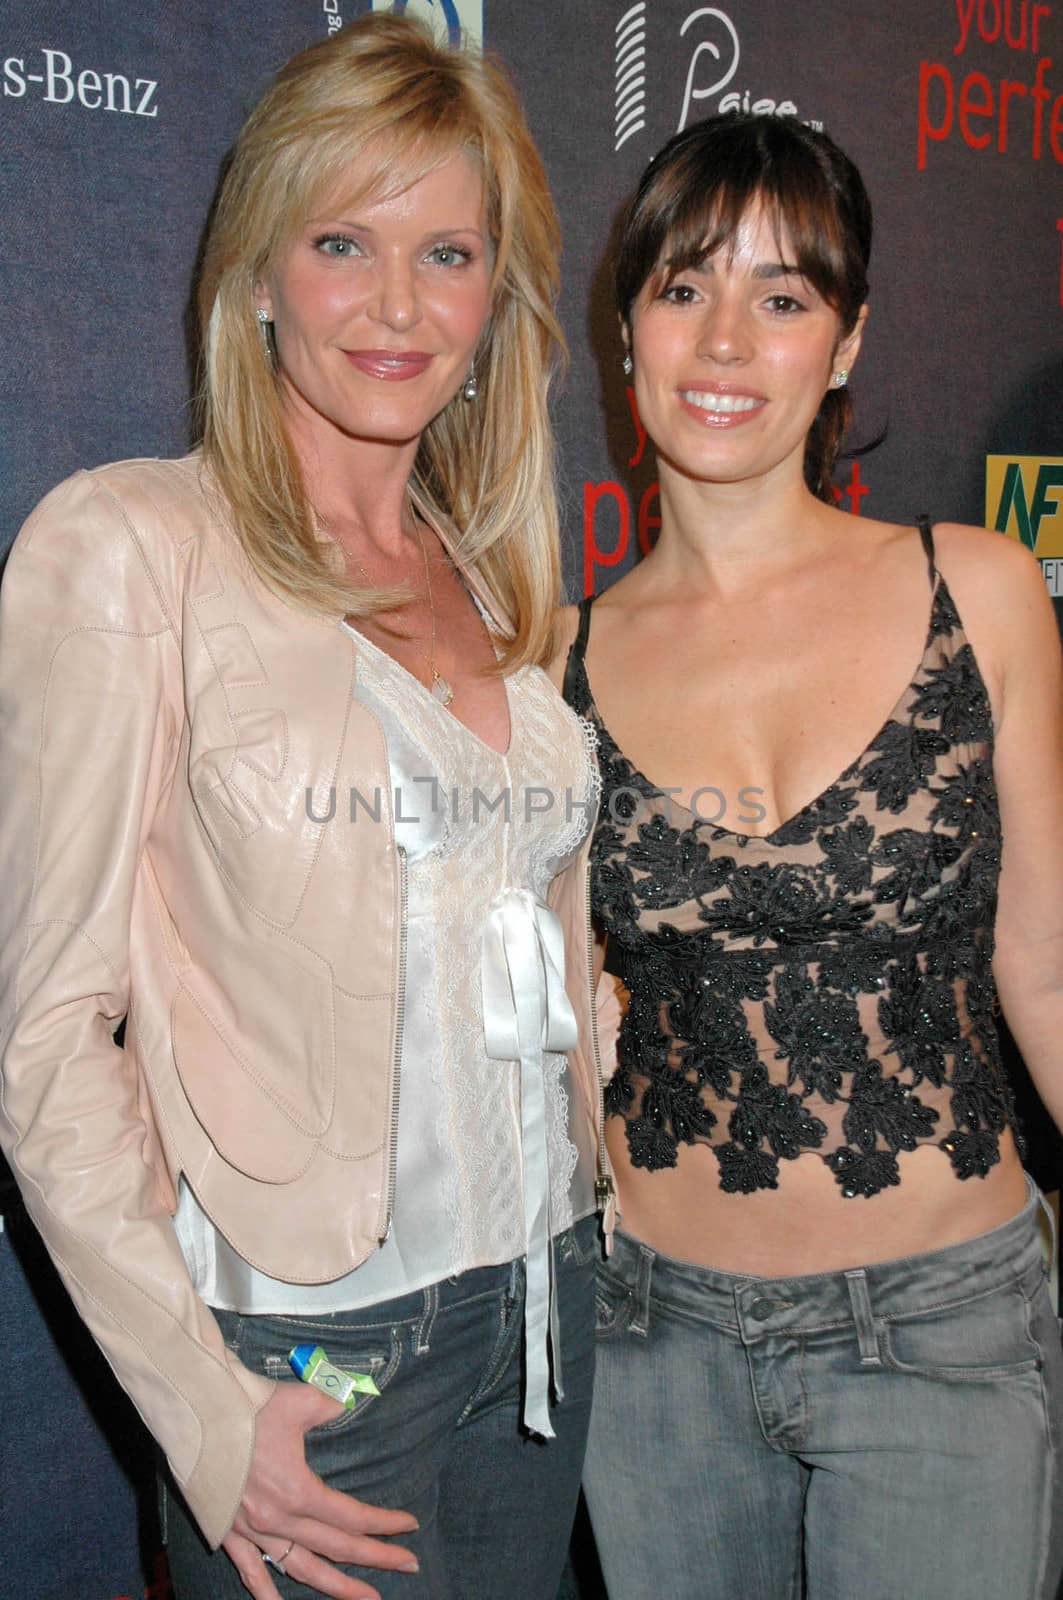 Paige Adams-Geller and Ana Ortiz at the Debut of "Your Perfect Fit" Lifestyle Guide. Paige Premium Denim Boutique, West Hollywood, CA. 02-28-08